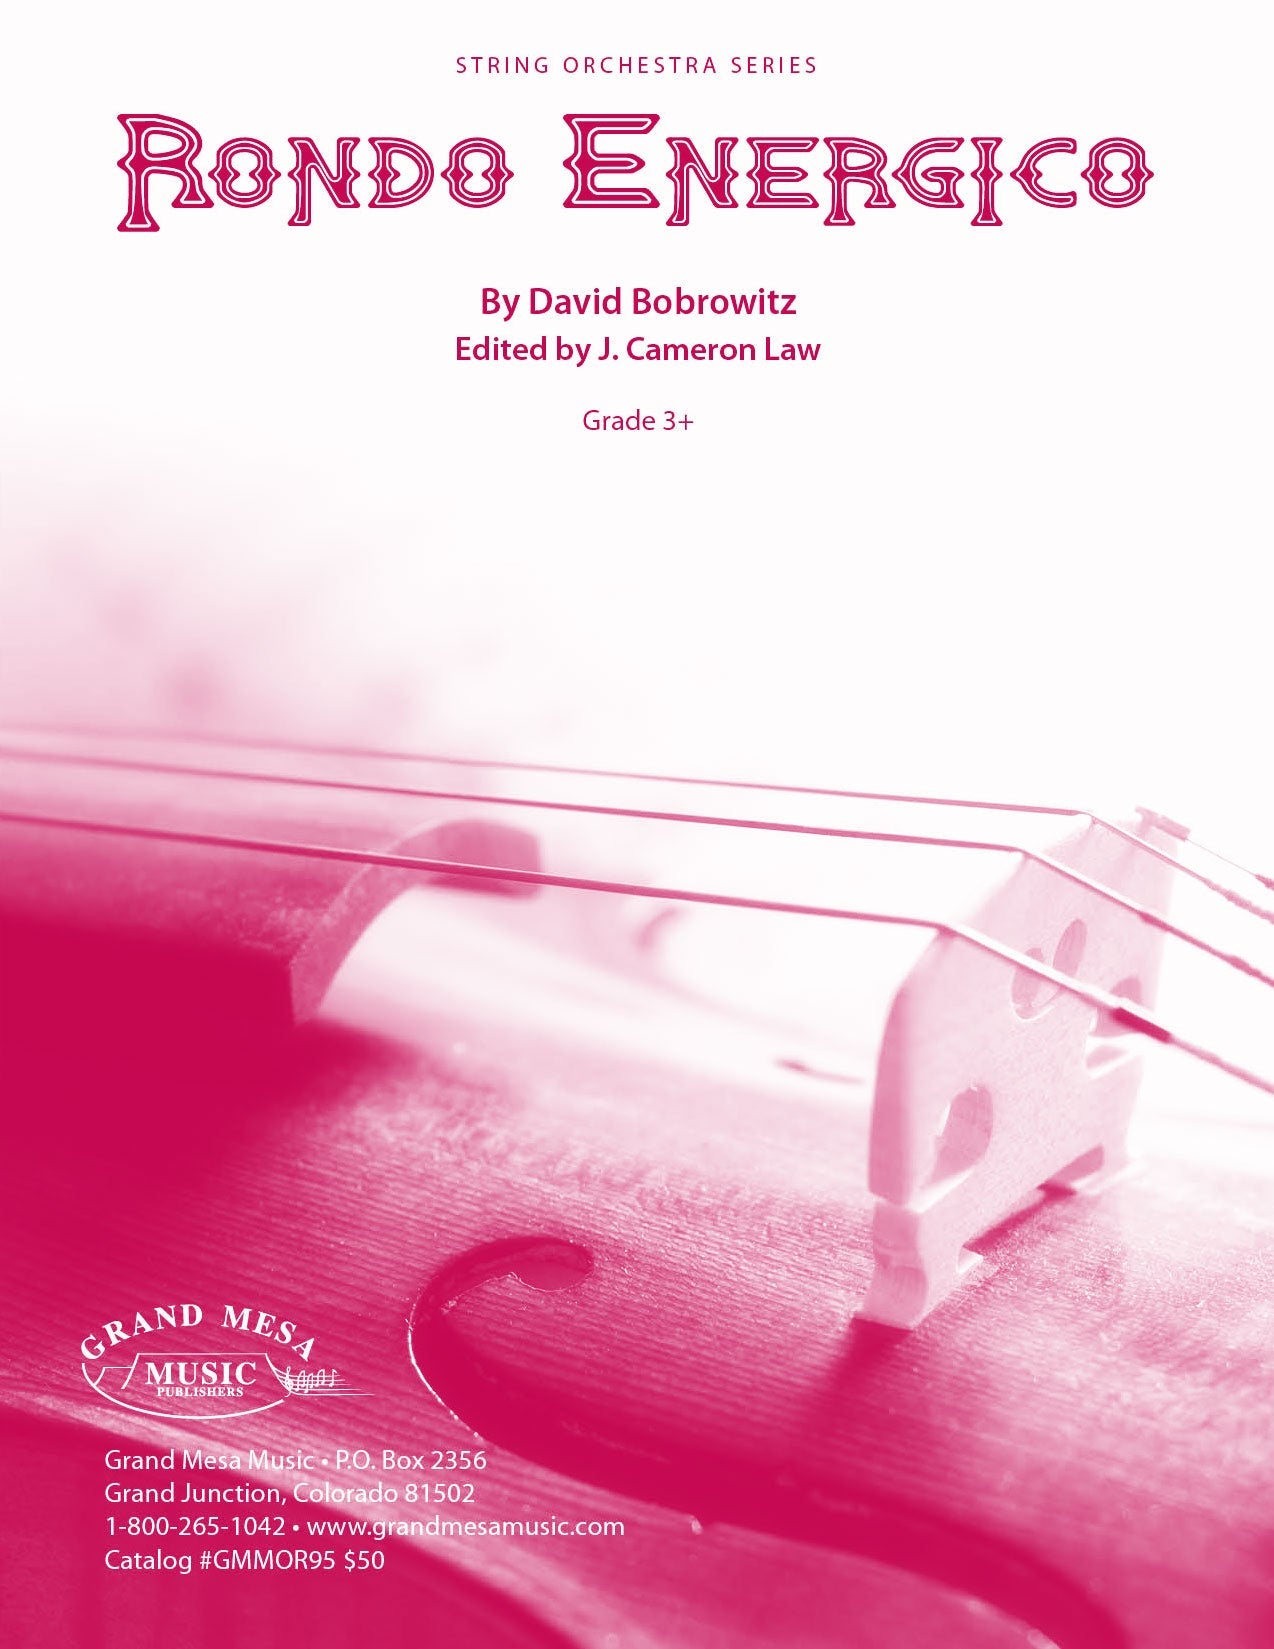 Strings sheet music cover of Rondo Energico, composed by David Bobrowitz.